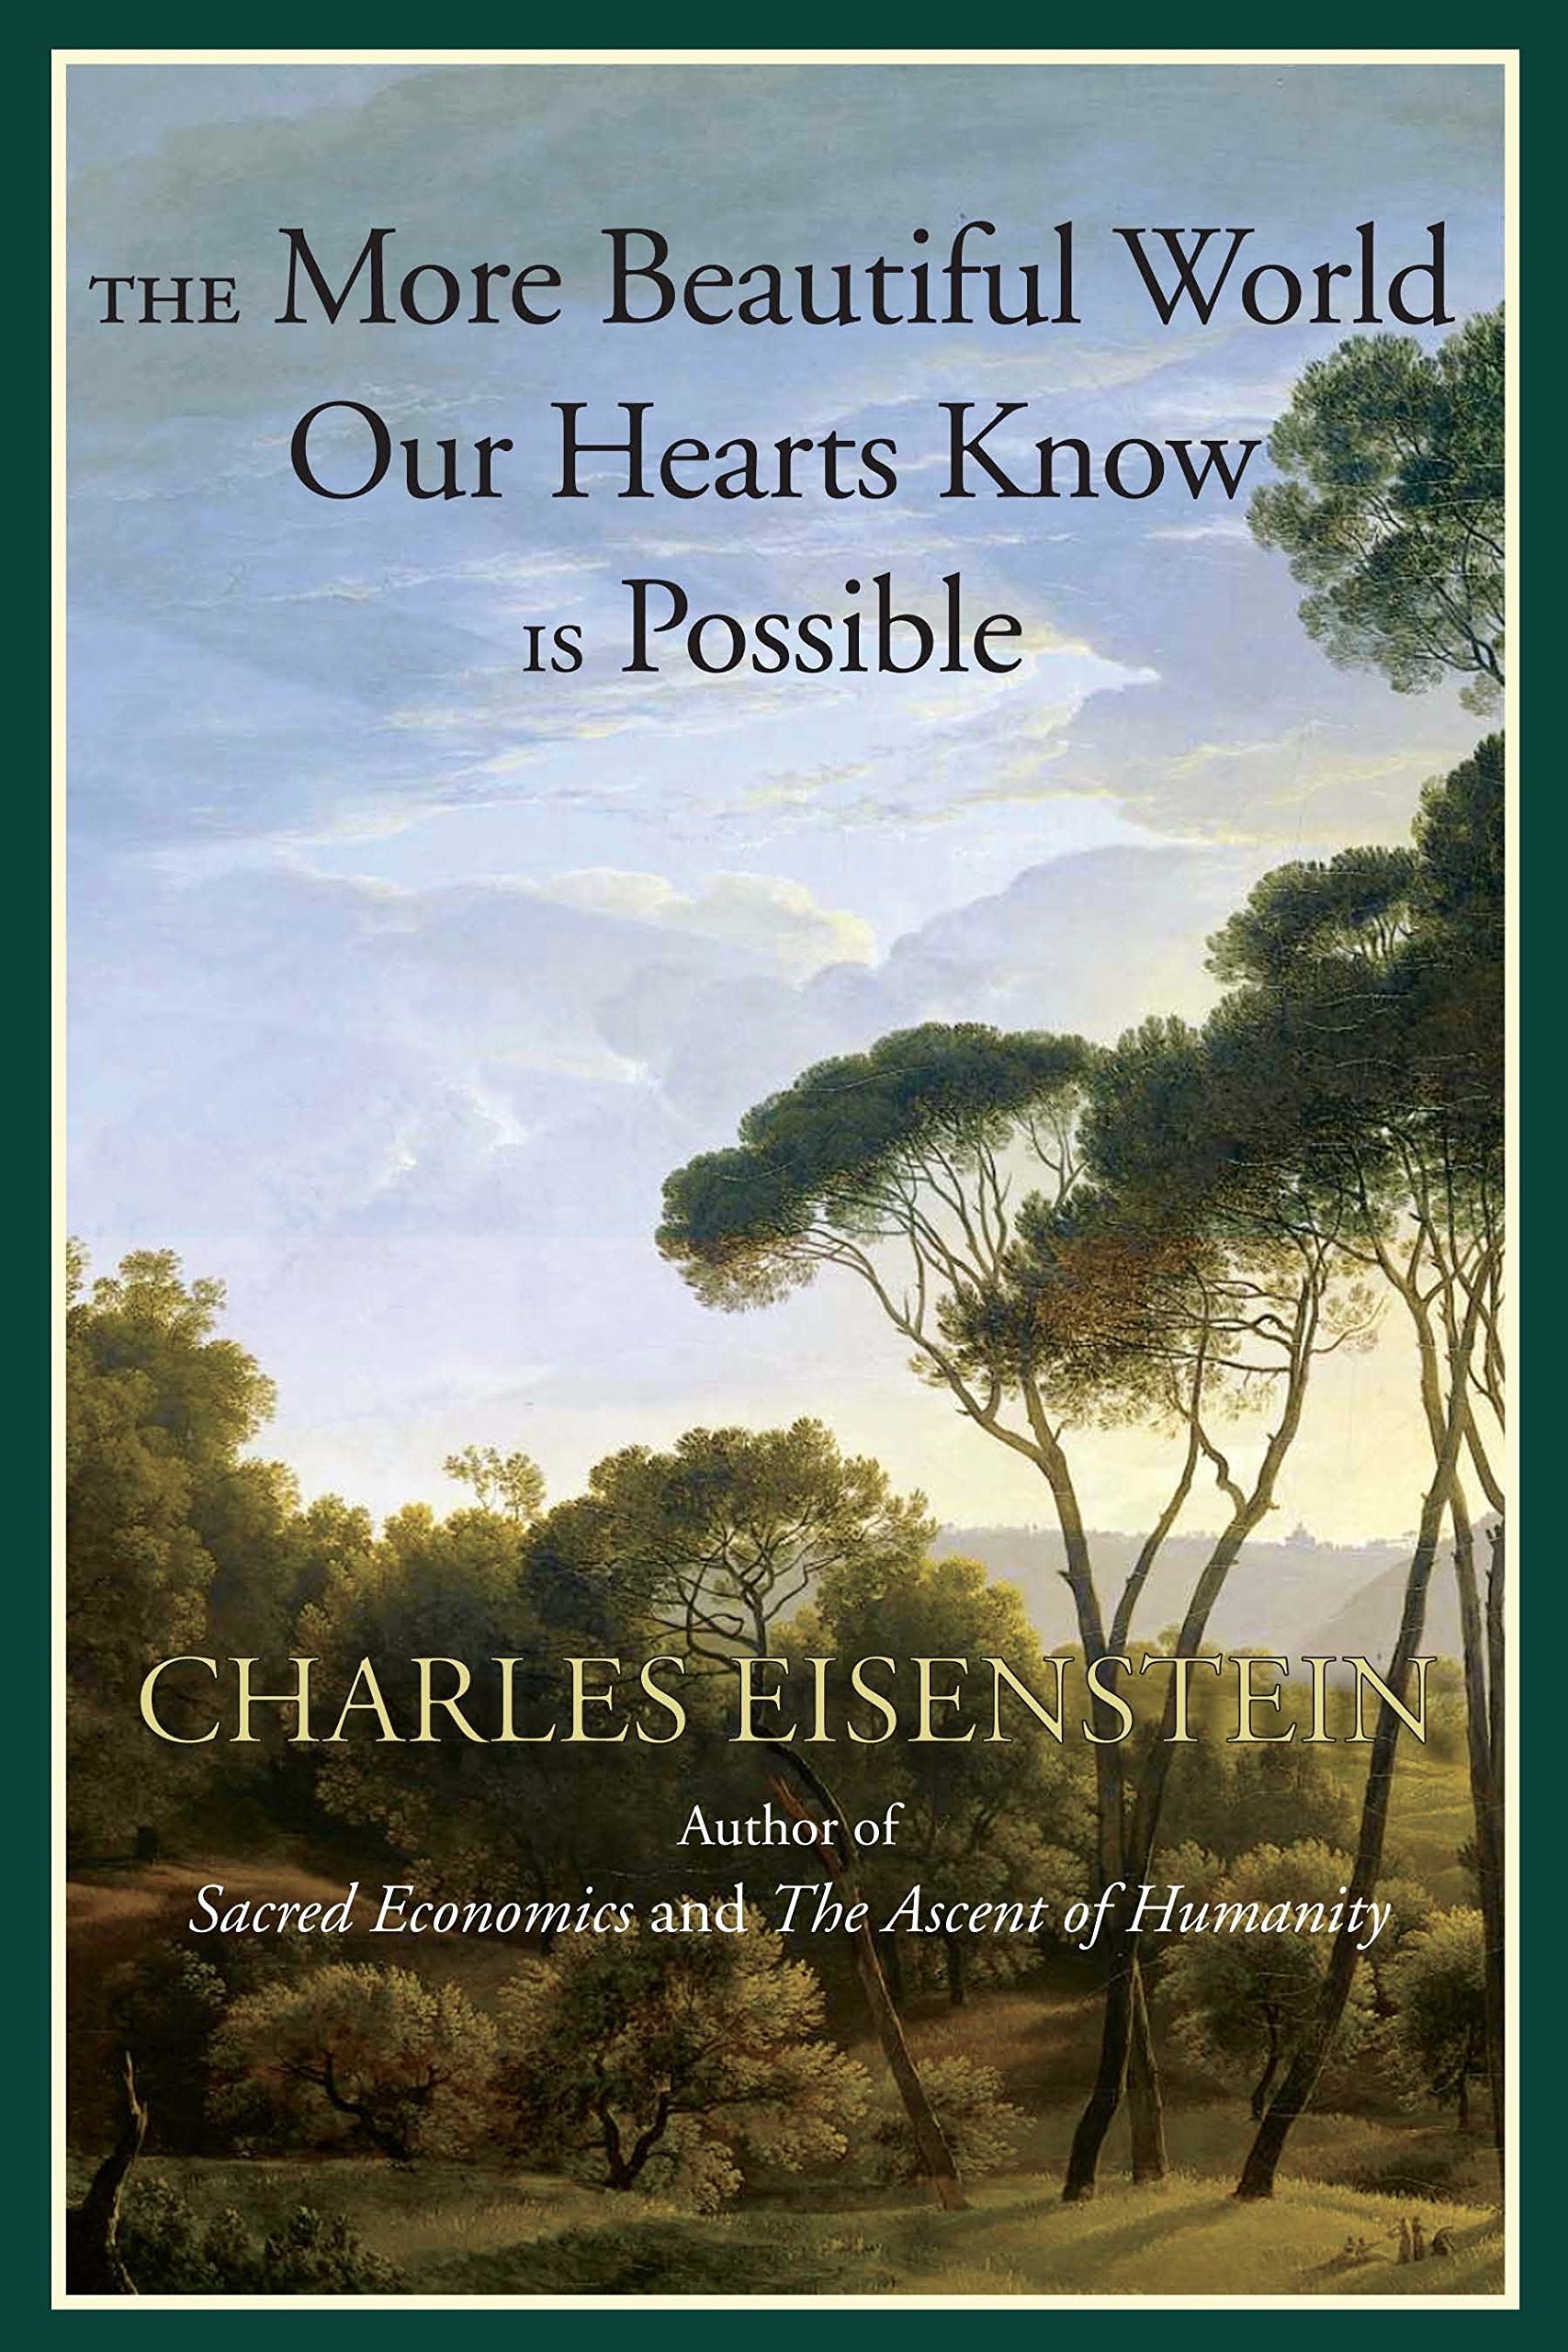 book9. the more beautiful world our hearts know is possiblejpg.jpg